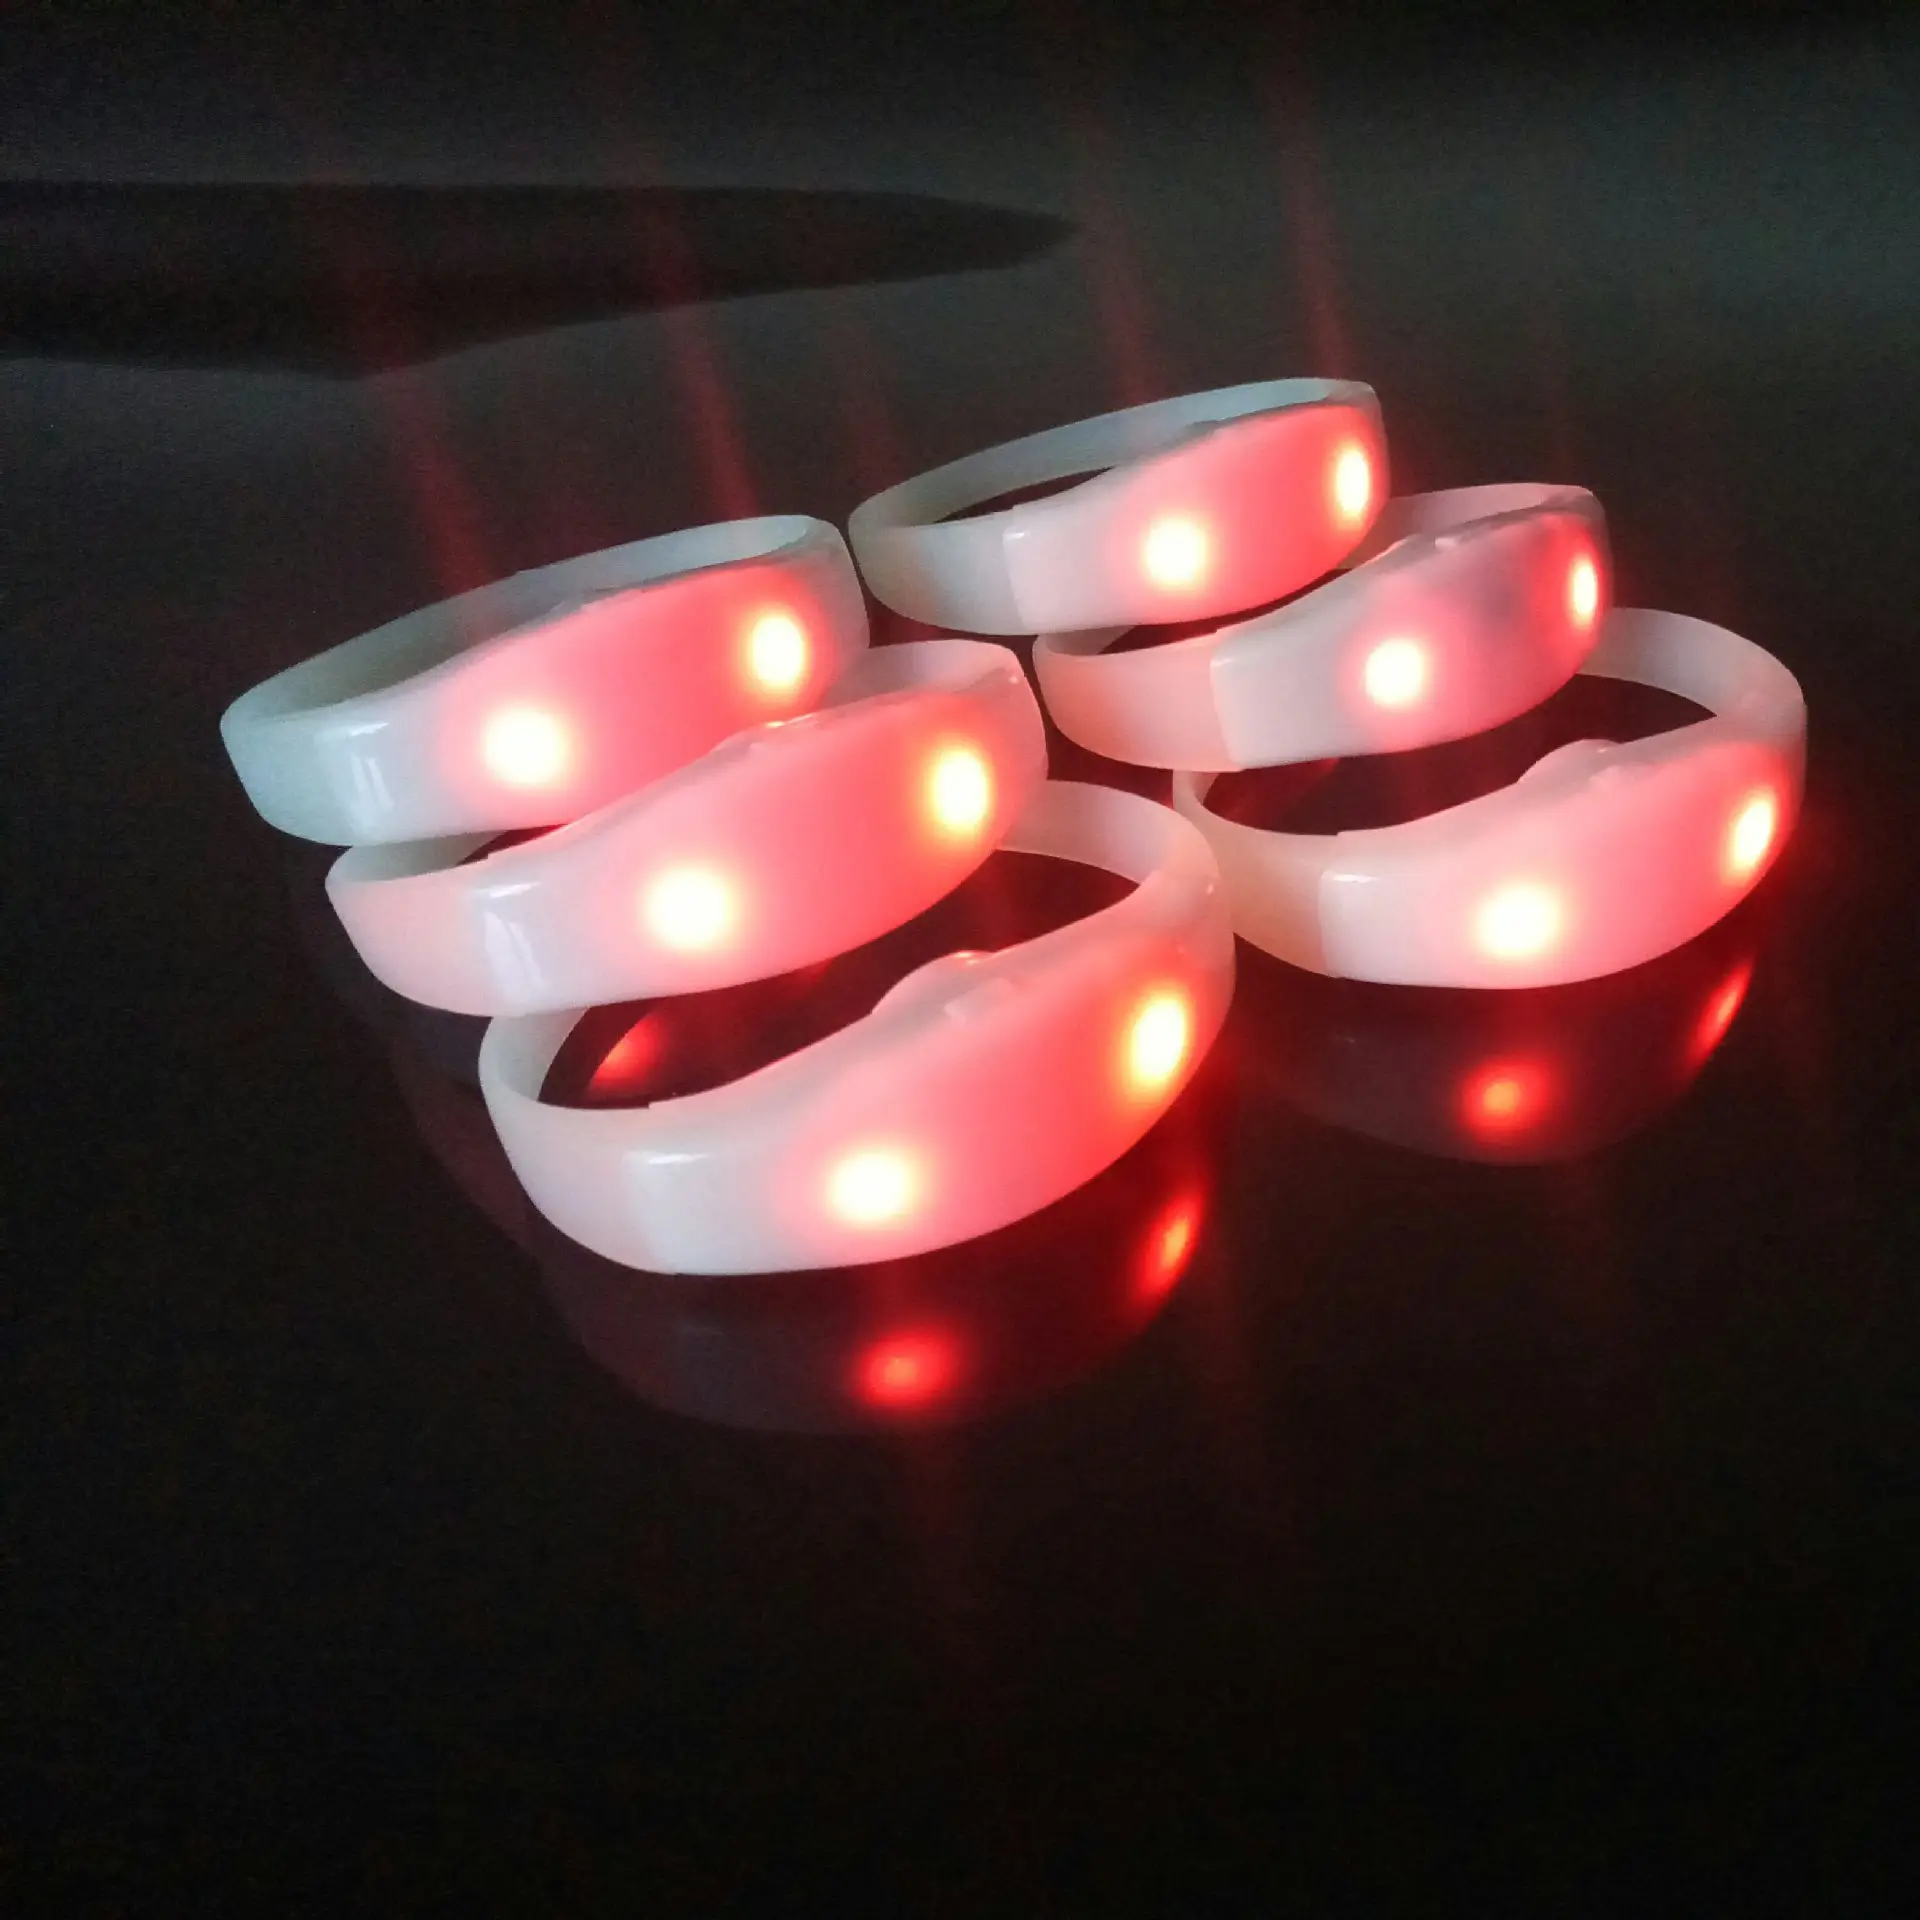 2022 custom logo DMX programmable wristband remote controlled led bracelet for party events concert